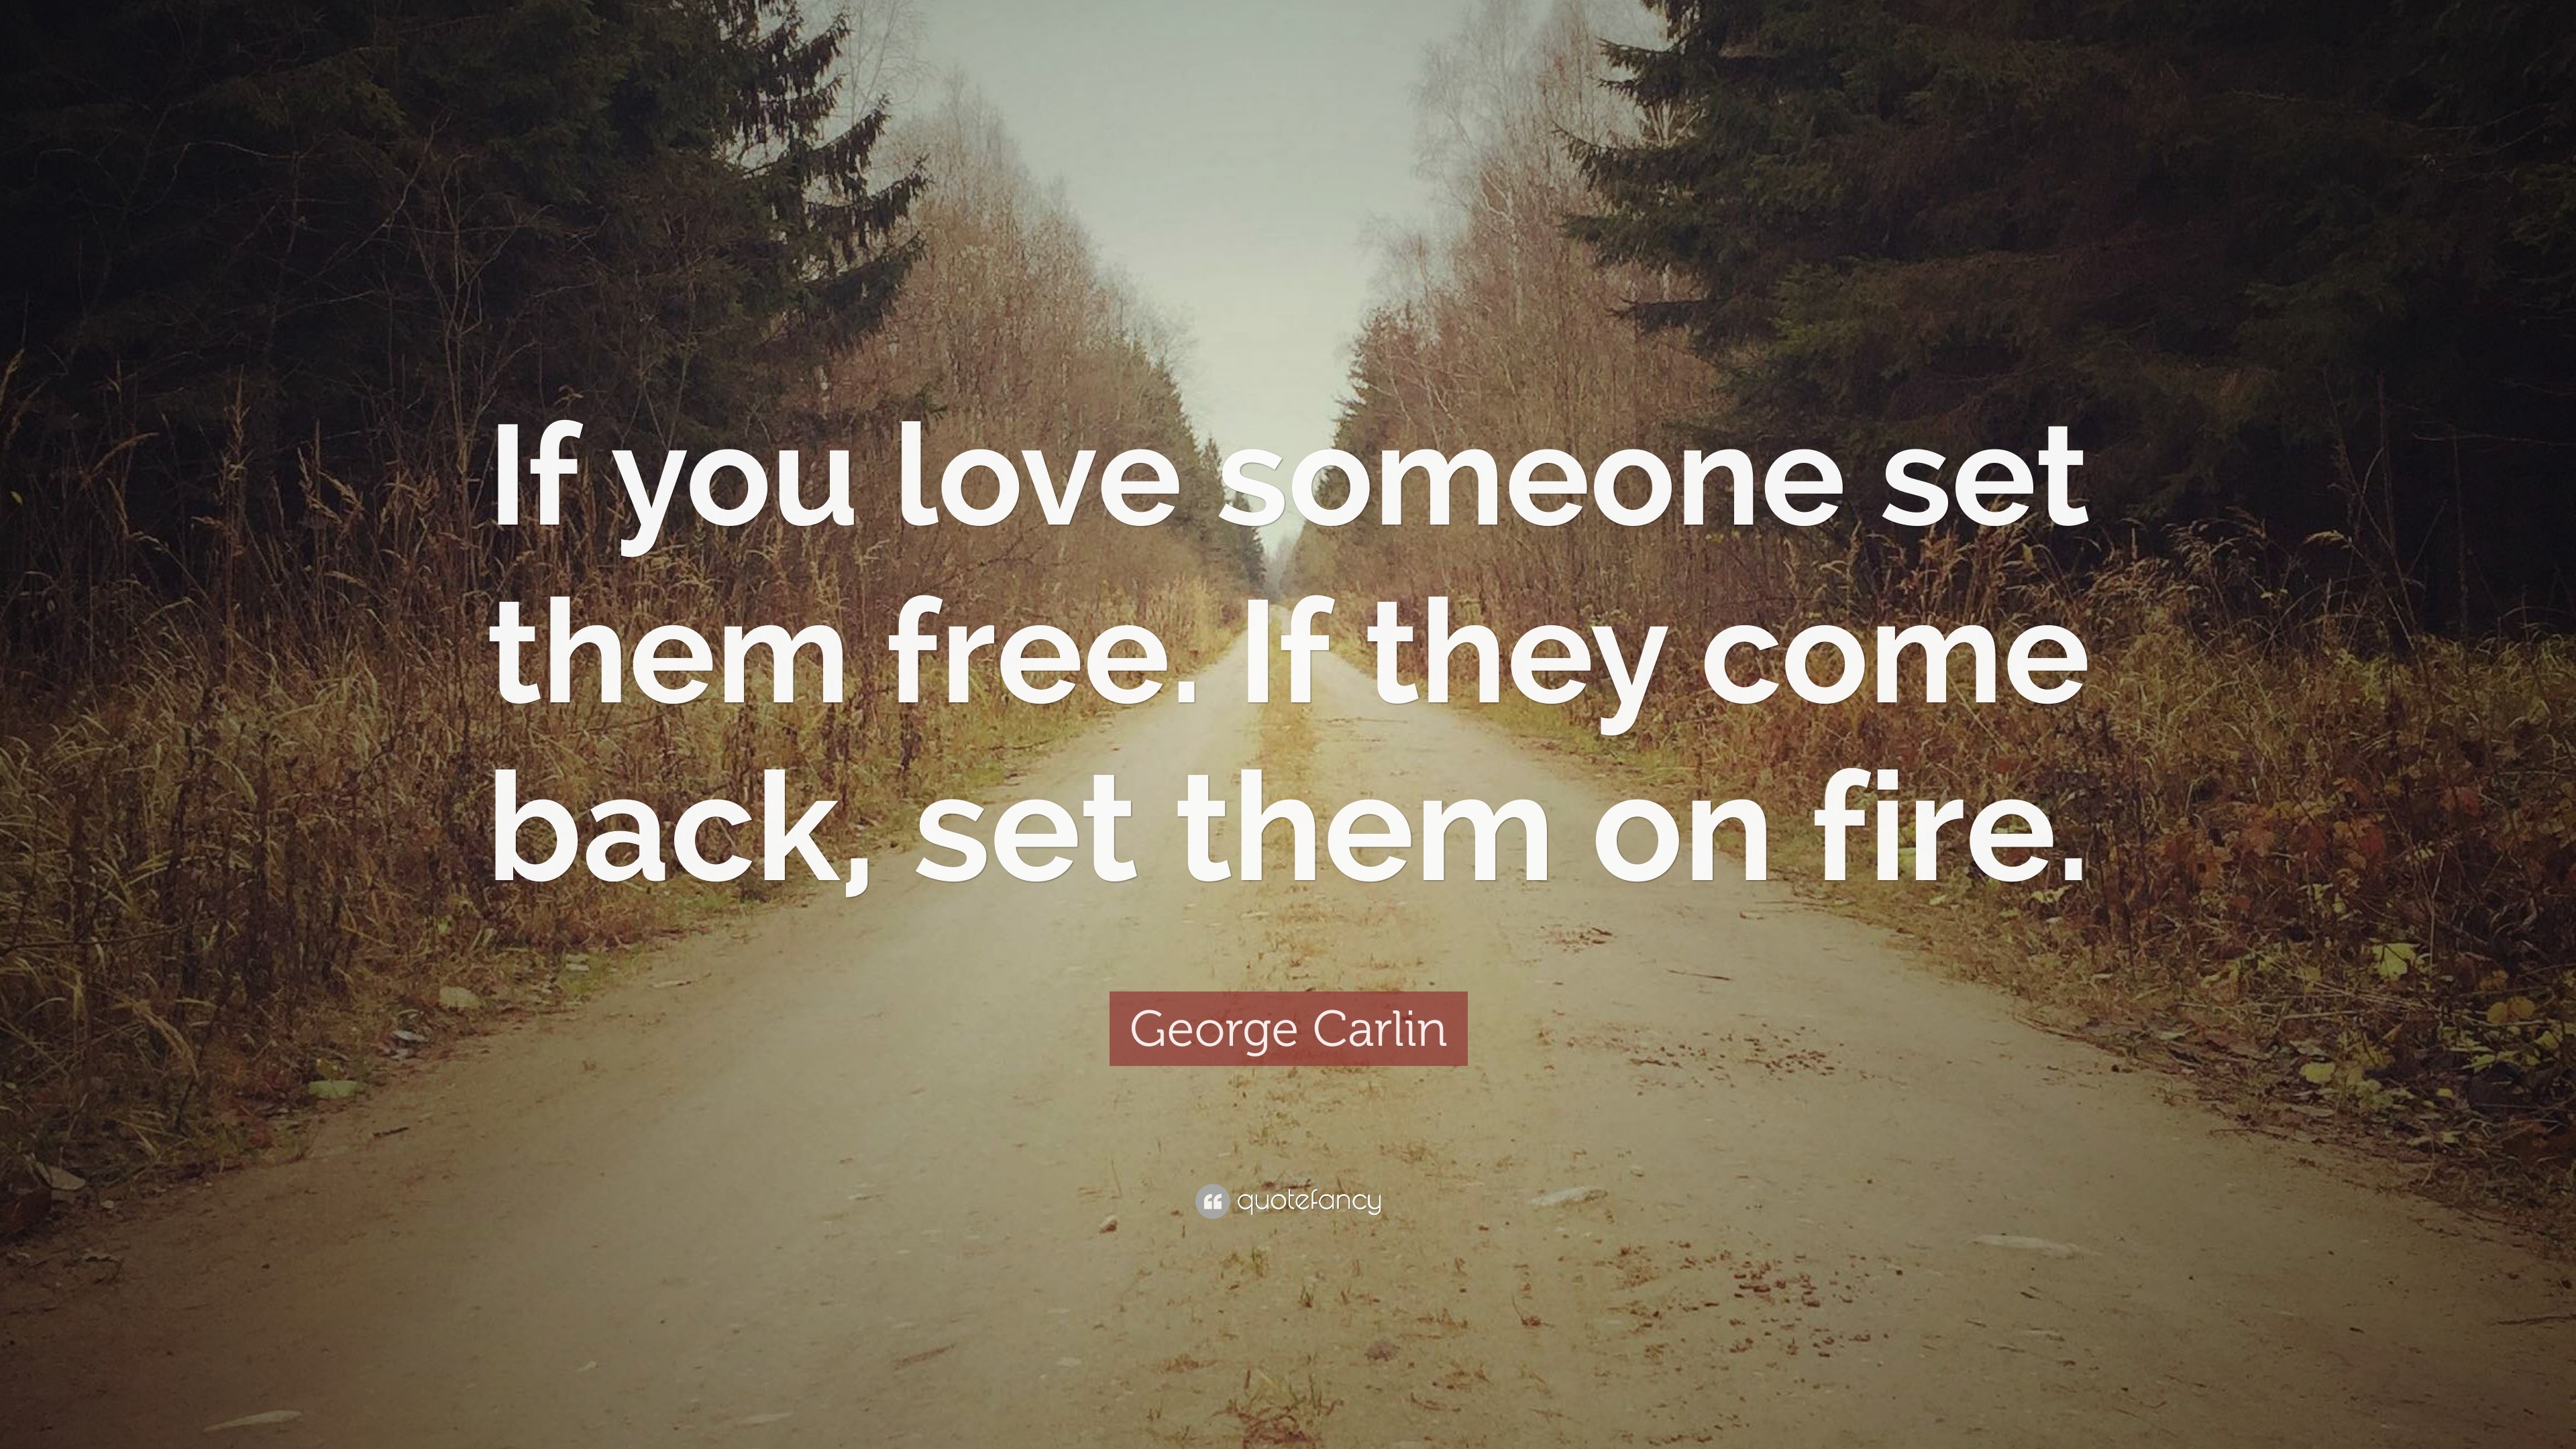 George Carlin Quote “If you love someone set them free If they e